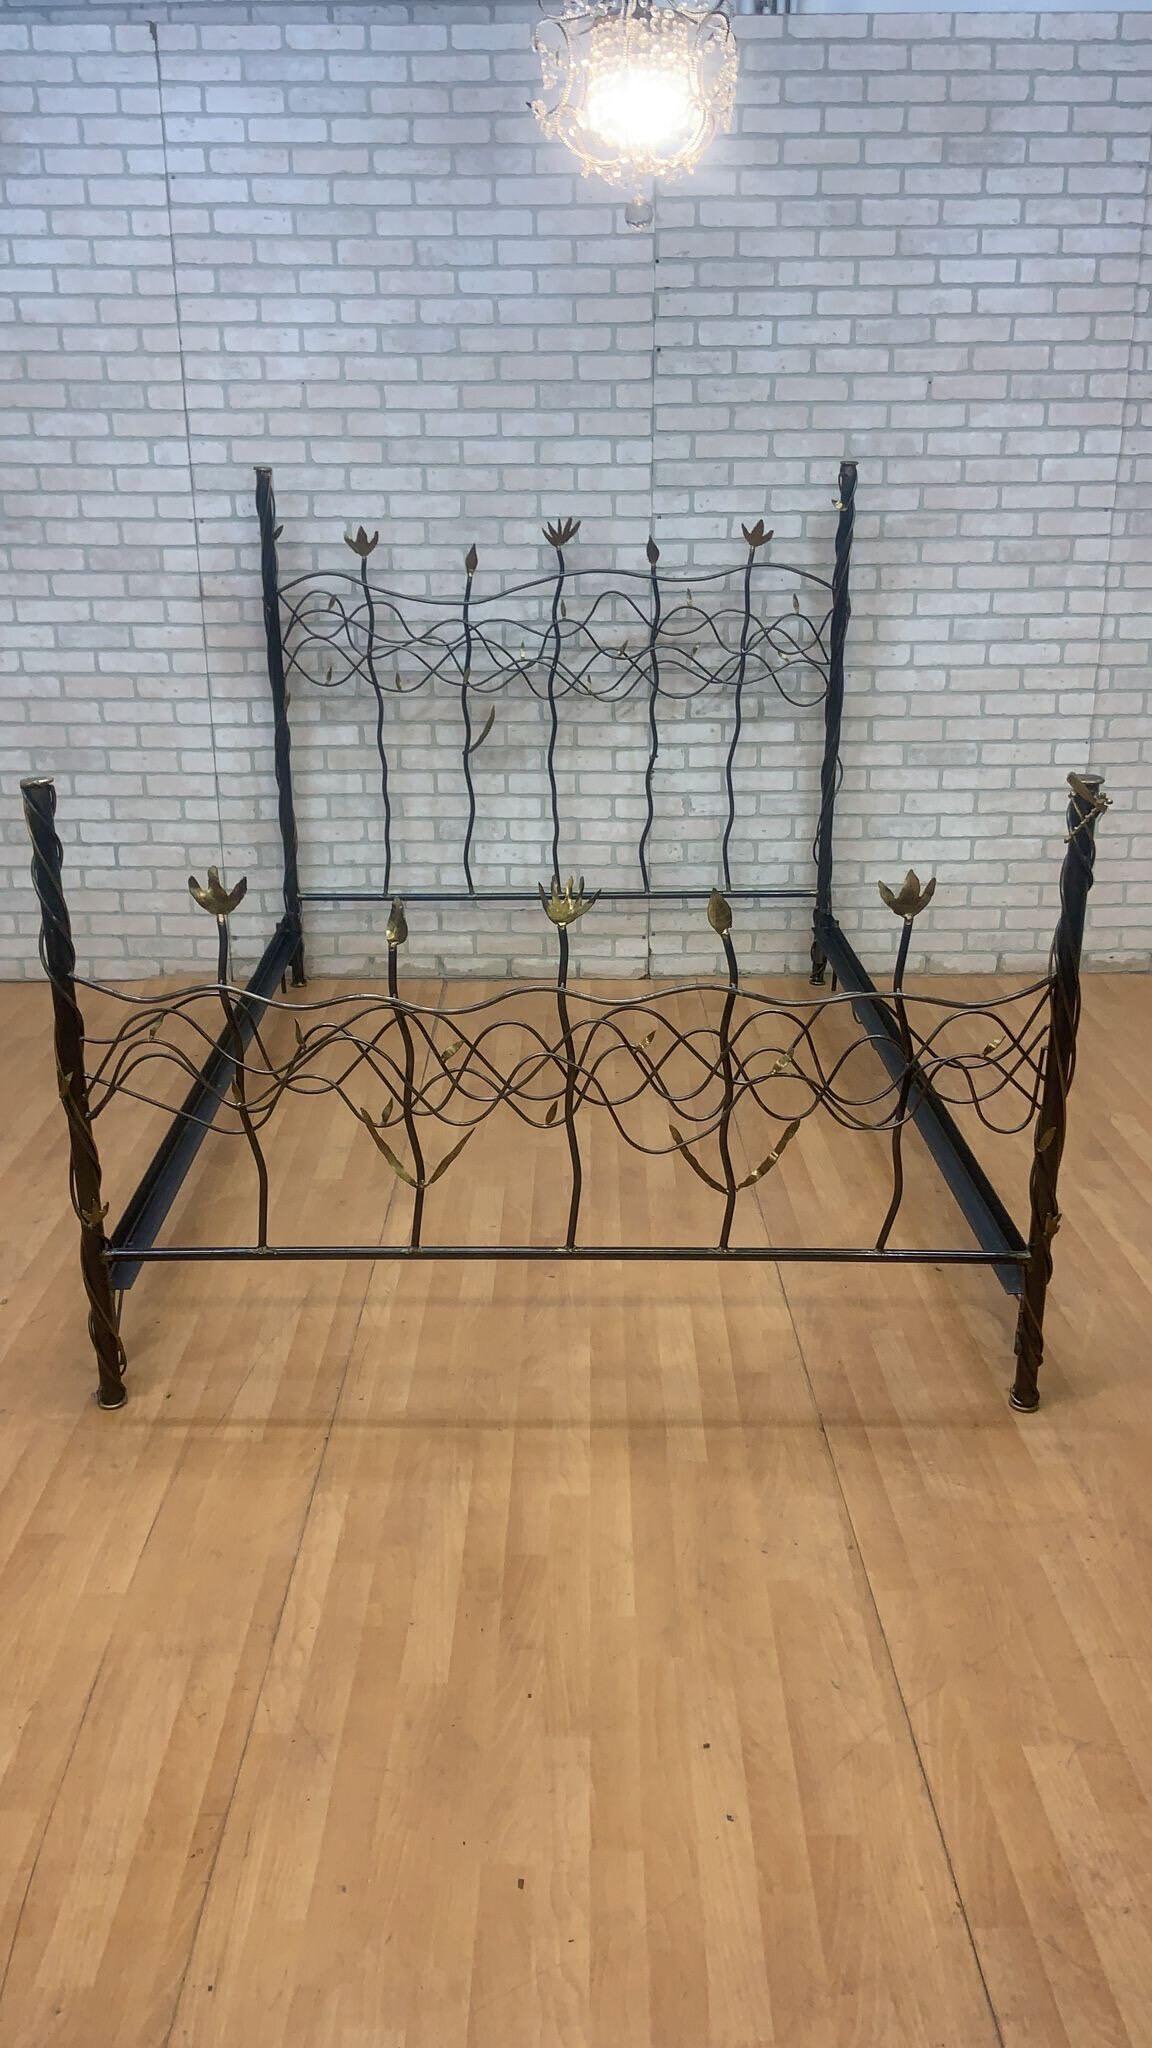 Vintage Modern Whimsical Hand Forged Steel & Brass Queen Bed Frame

Gorgeous hand forged Whimsical Steel & Brass Queen Bed Frame. This Frame Consists of a Headboard, Footboard and Side Rails. This Piece is Made of Hand Forged Steel & Brass